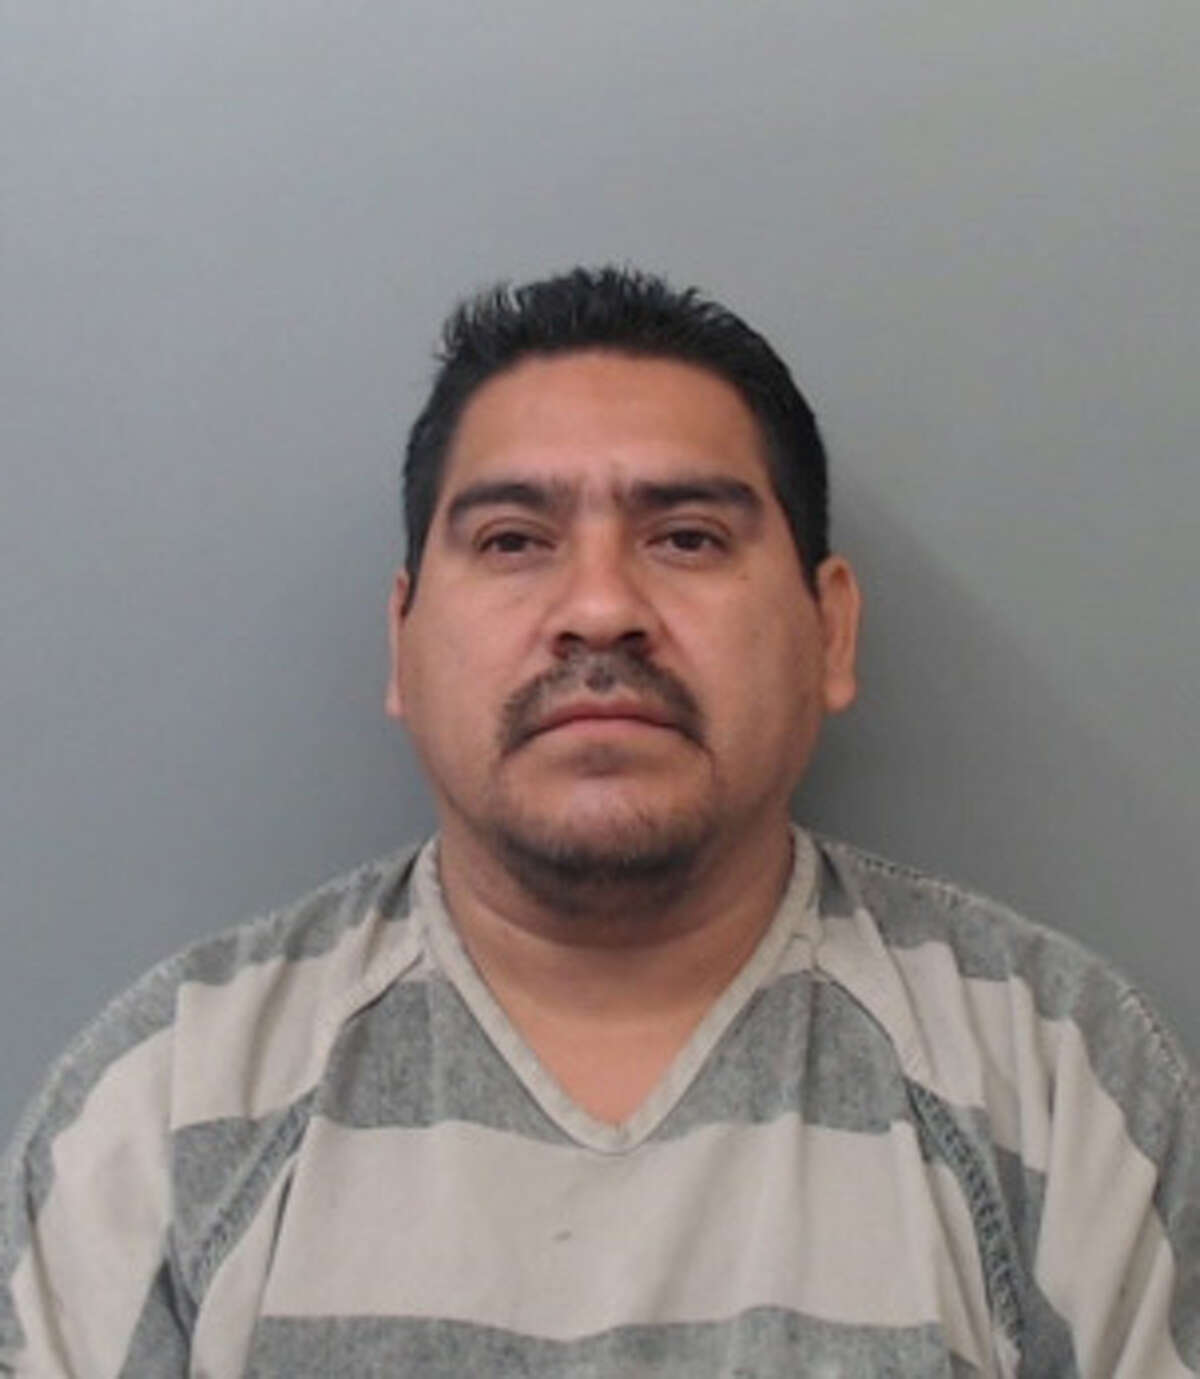 Juan Carlos Rojas-Acevedo, 42, was charged with aggravated sexual assault of a child.